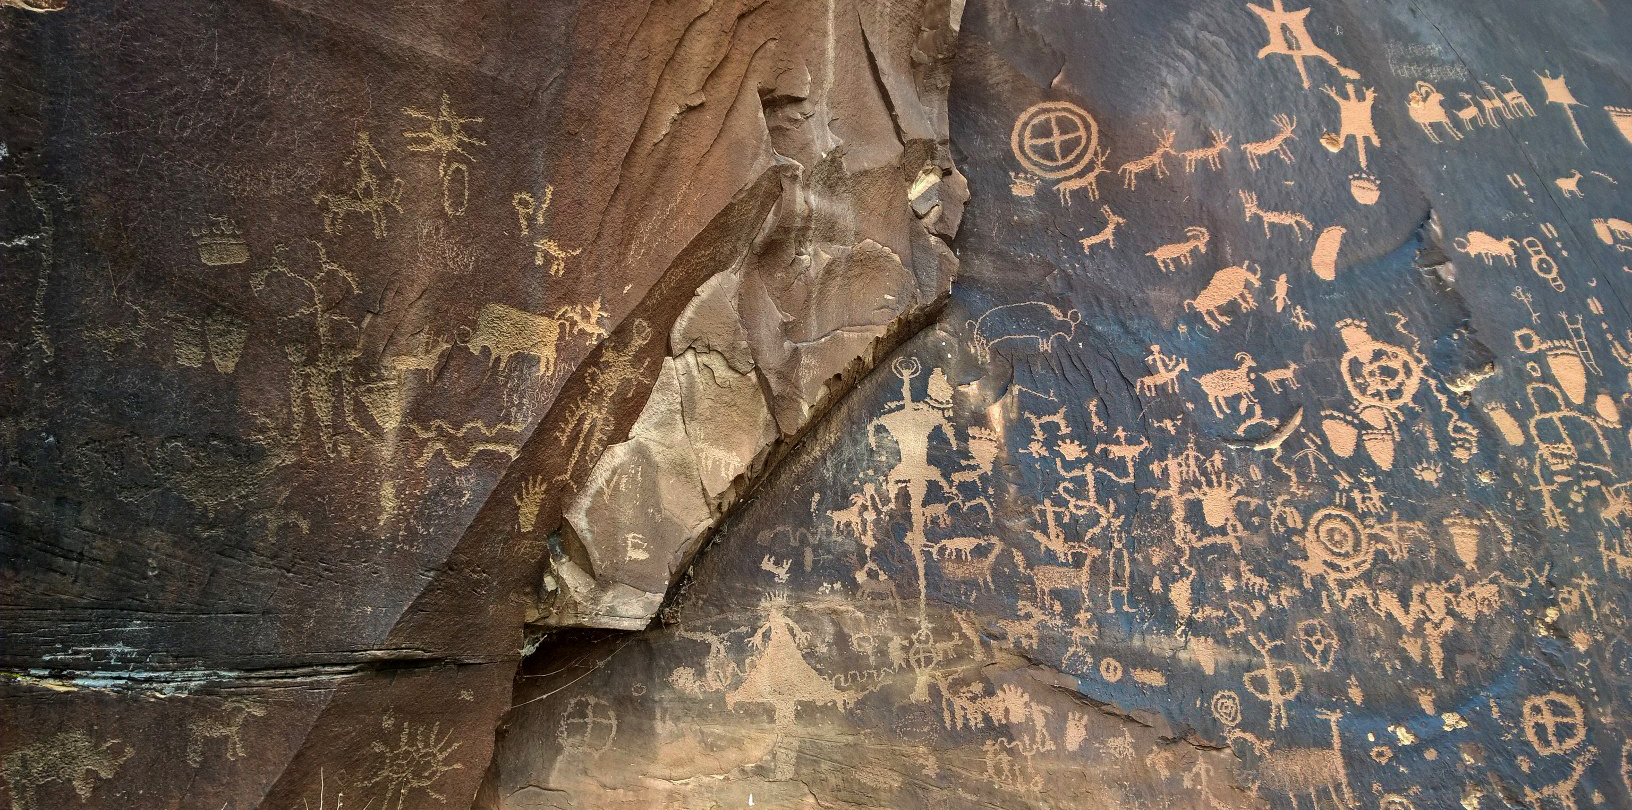 Wide view of the petroglyphs